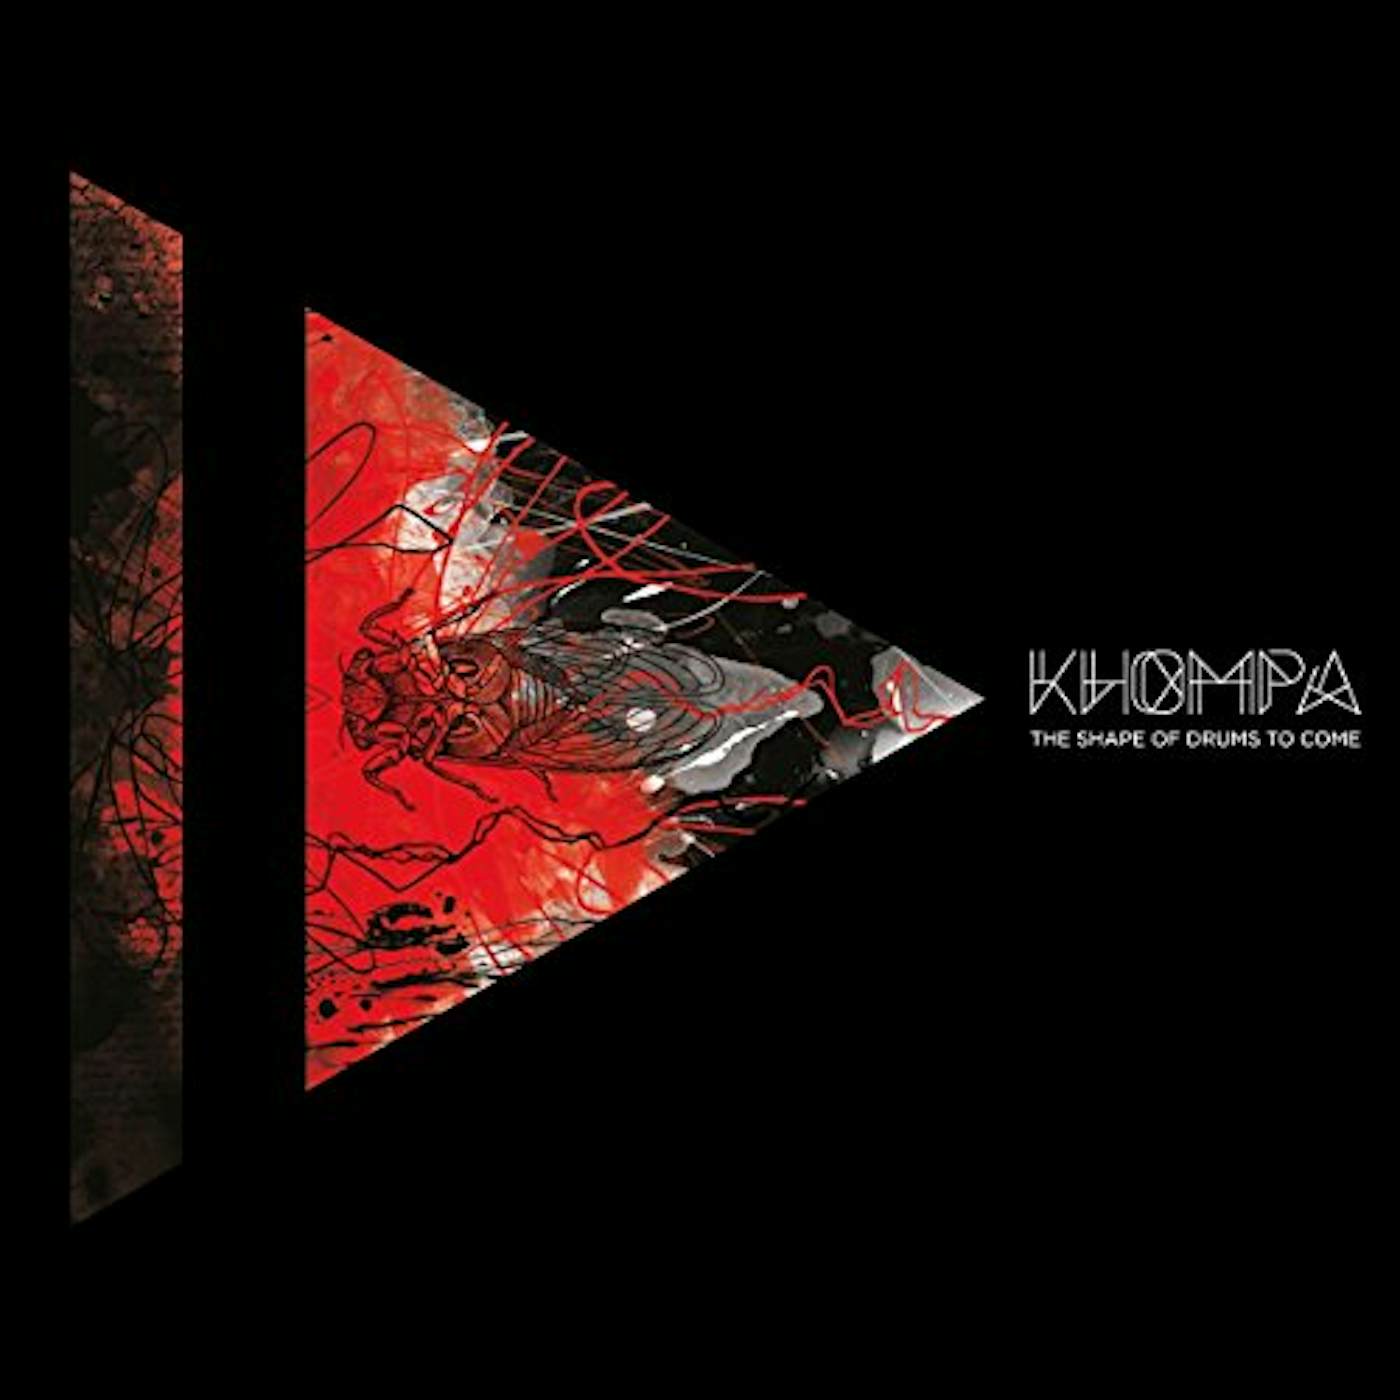 KHOMPA SHAPE OF DRUMS TO COME CD